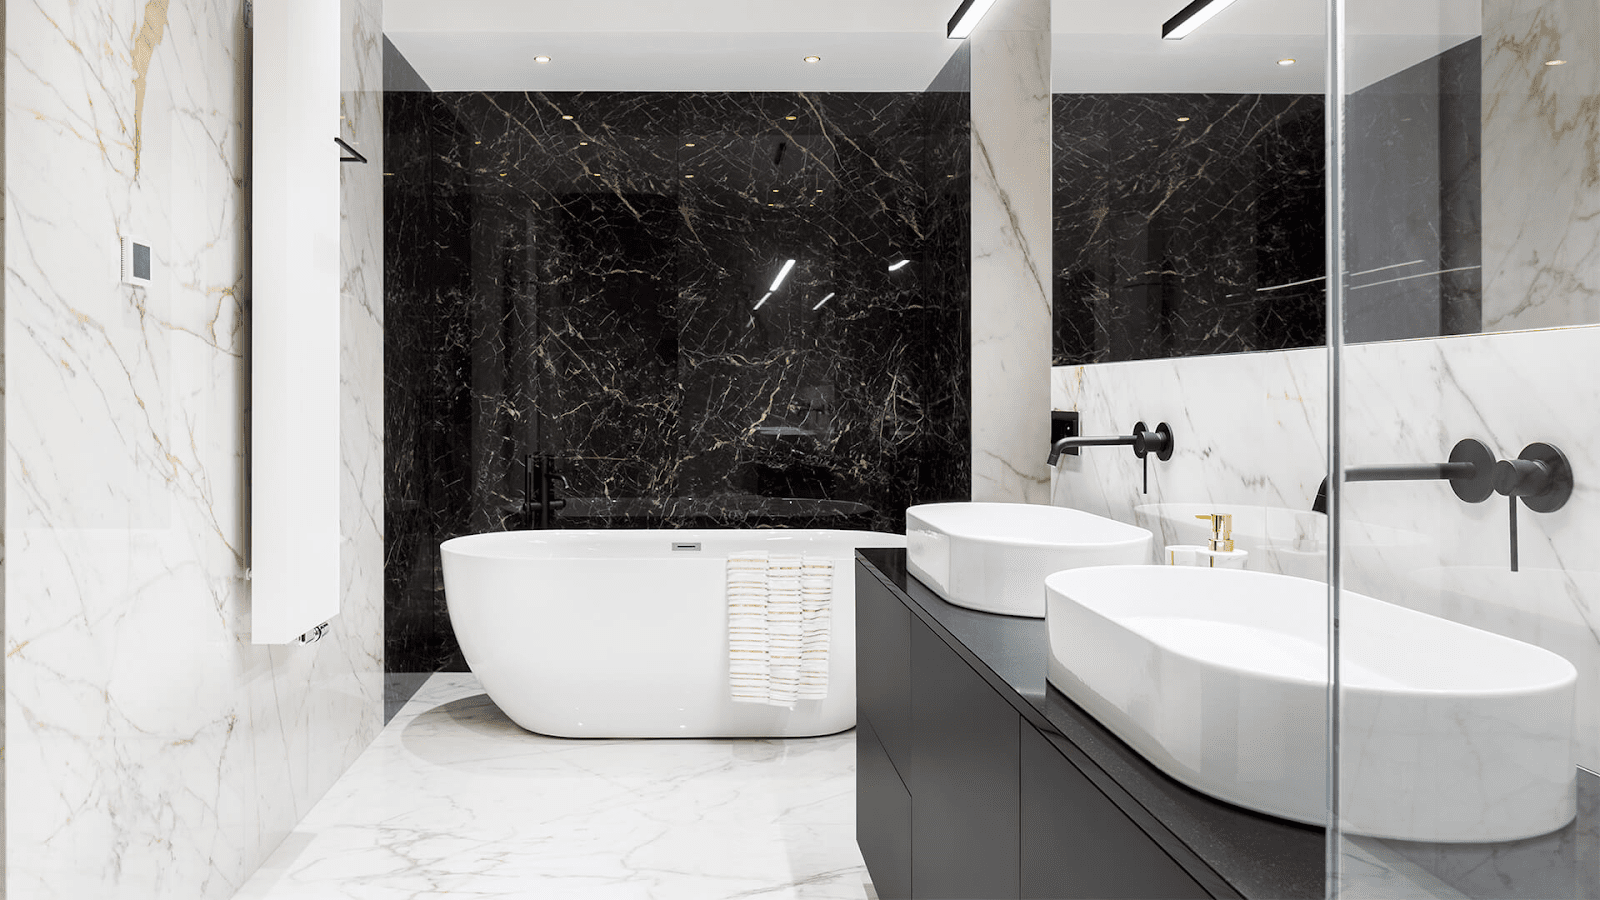 There are numerous ways to give your bathroom a fancy hotel vibe. Source: lux-review 